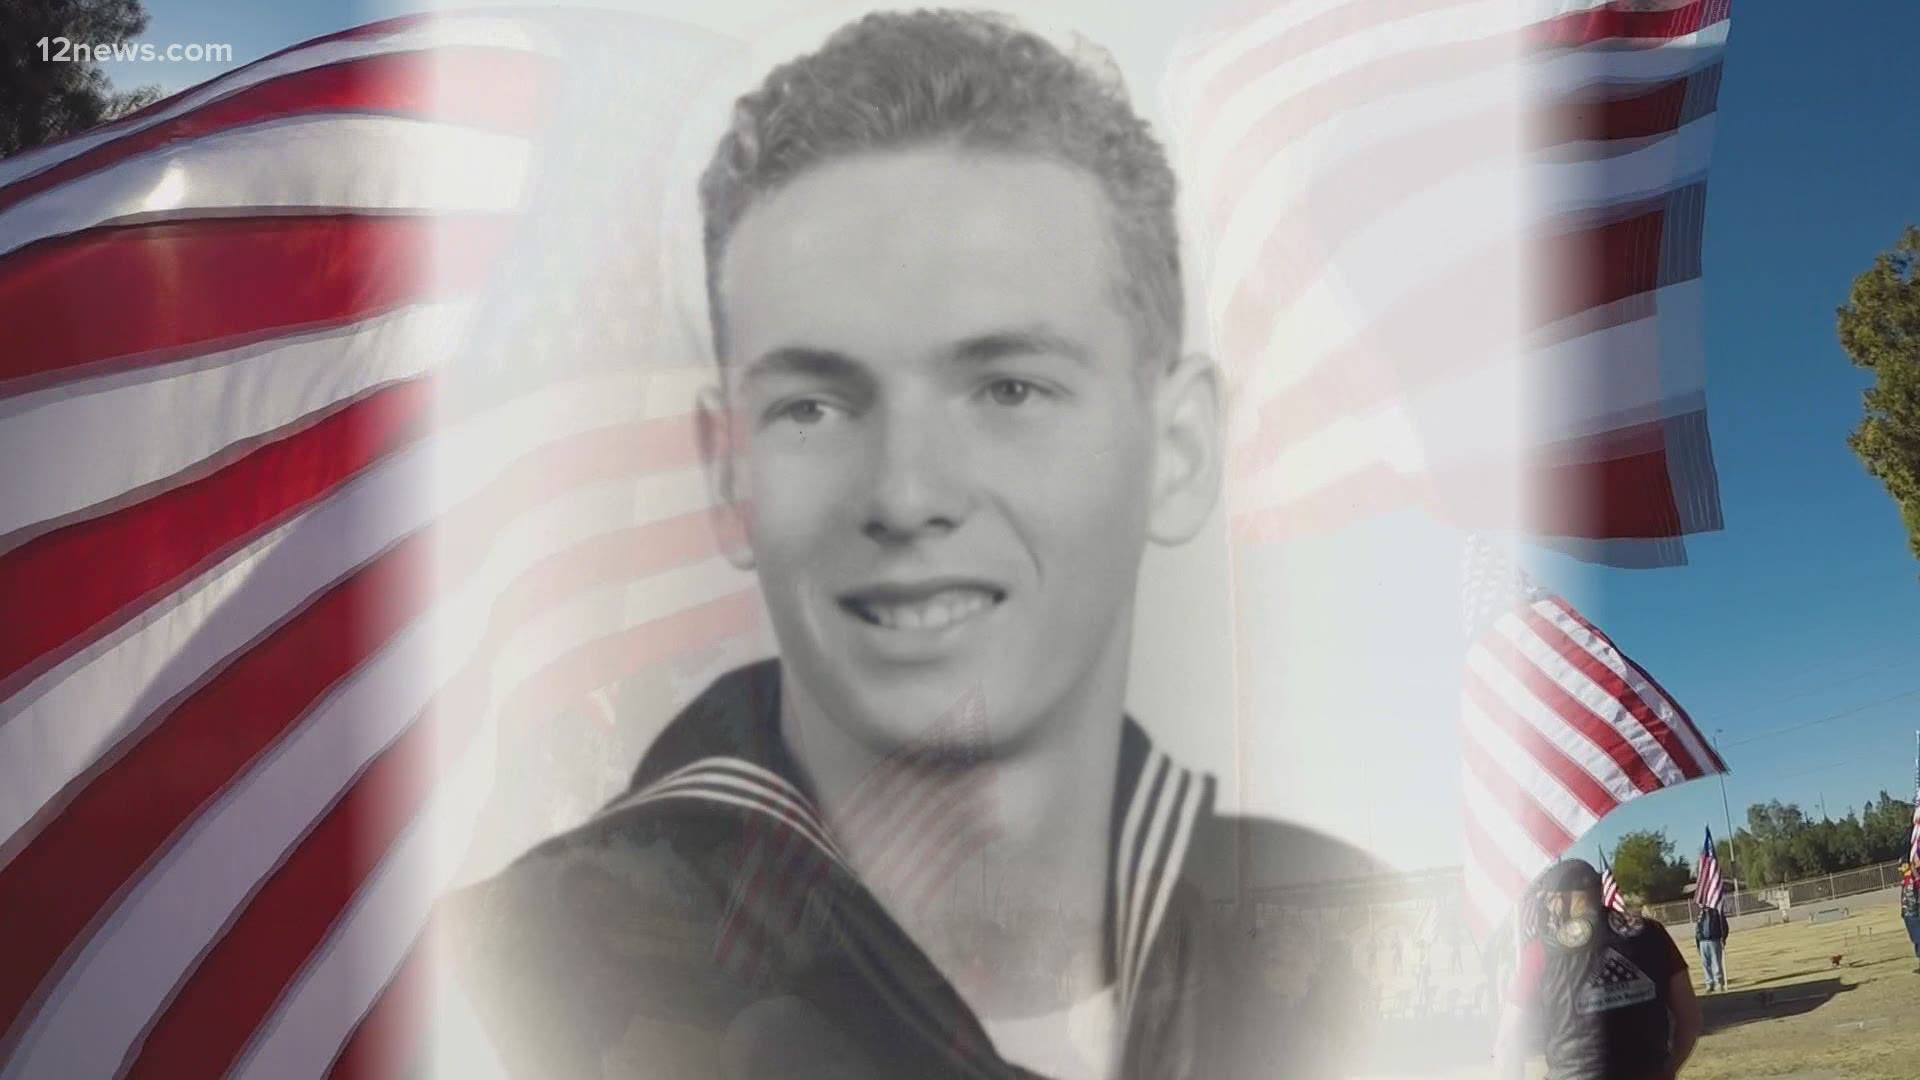 It took nearly 80 years for Navy Seaman 1st Class Carl Johnson to return home to Phoenix, but today was finally buried at home.